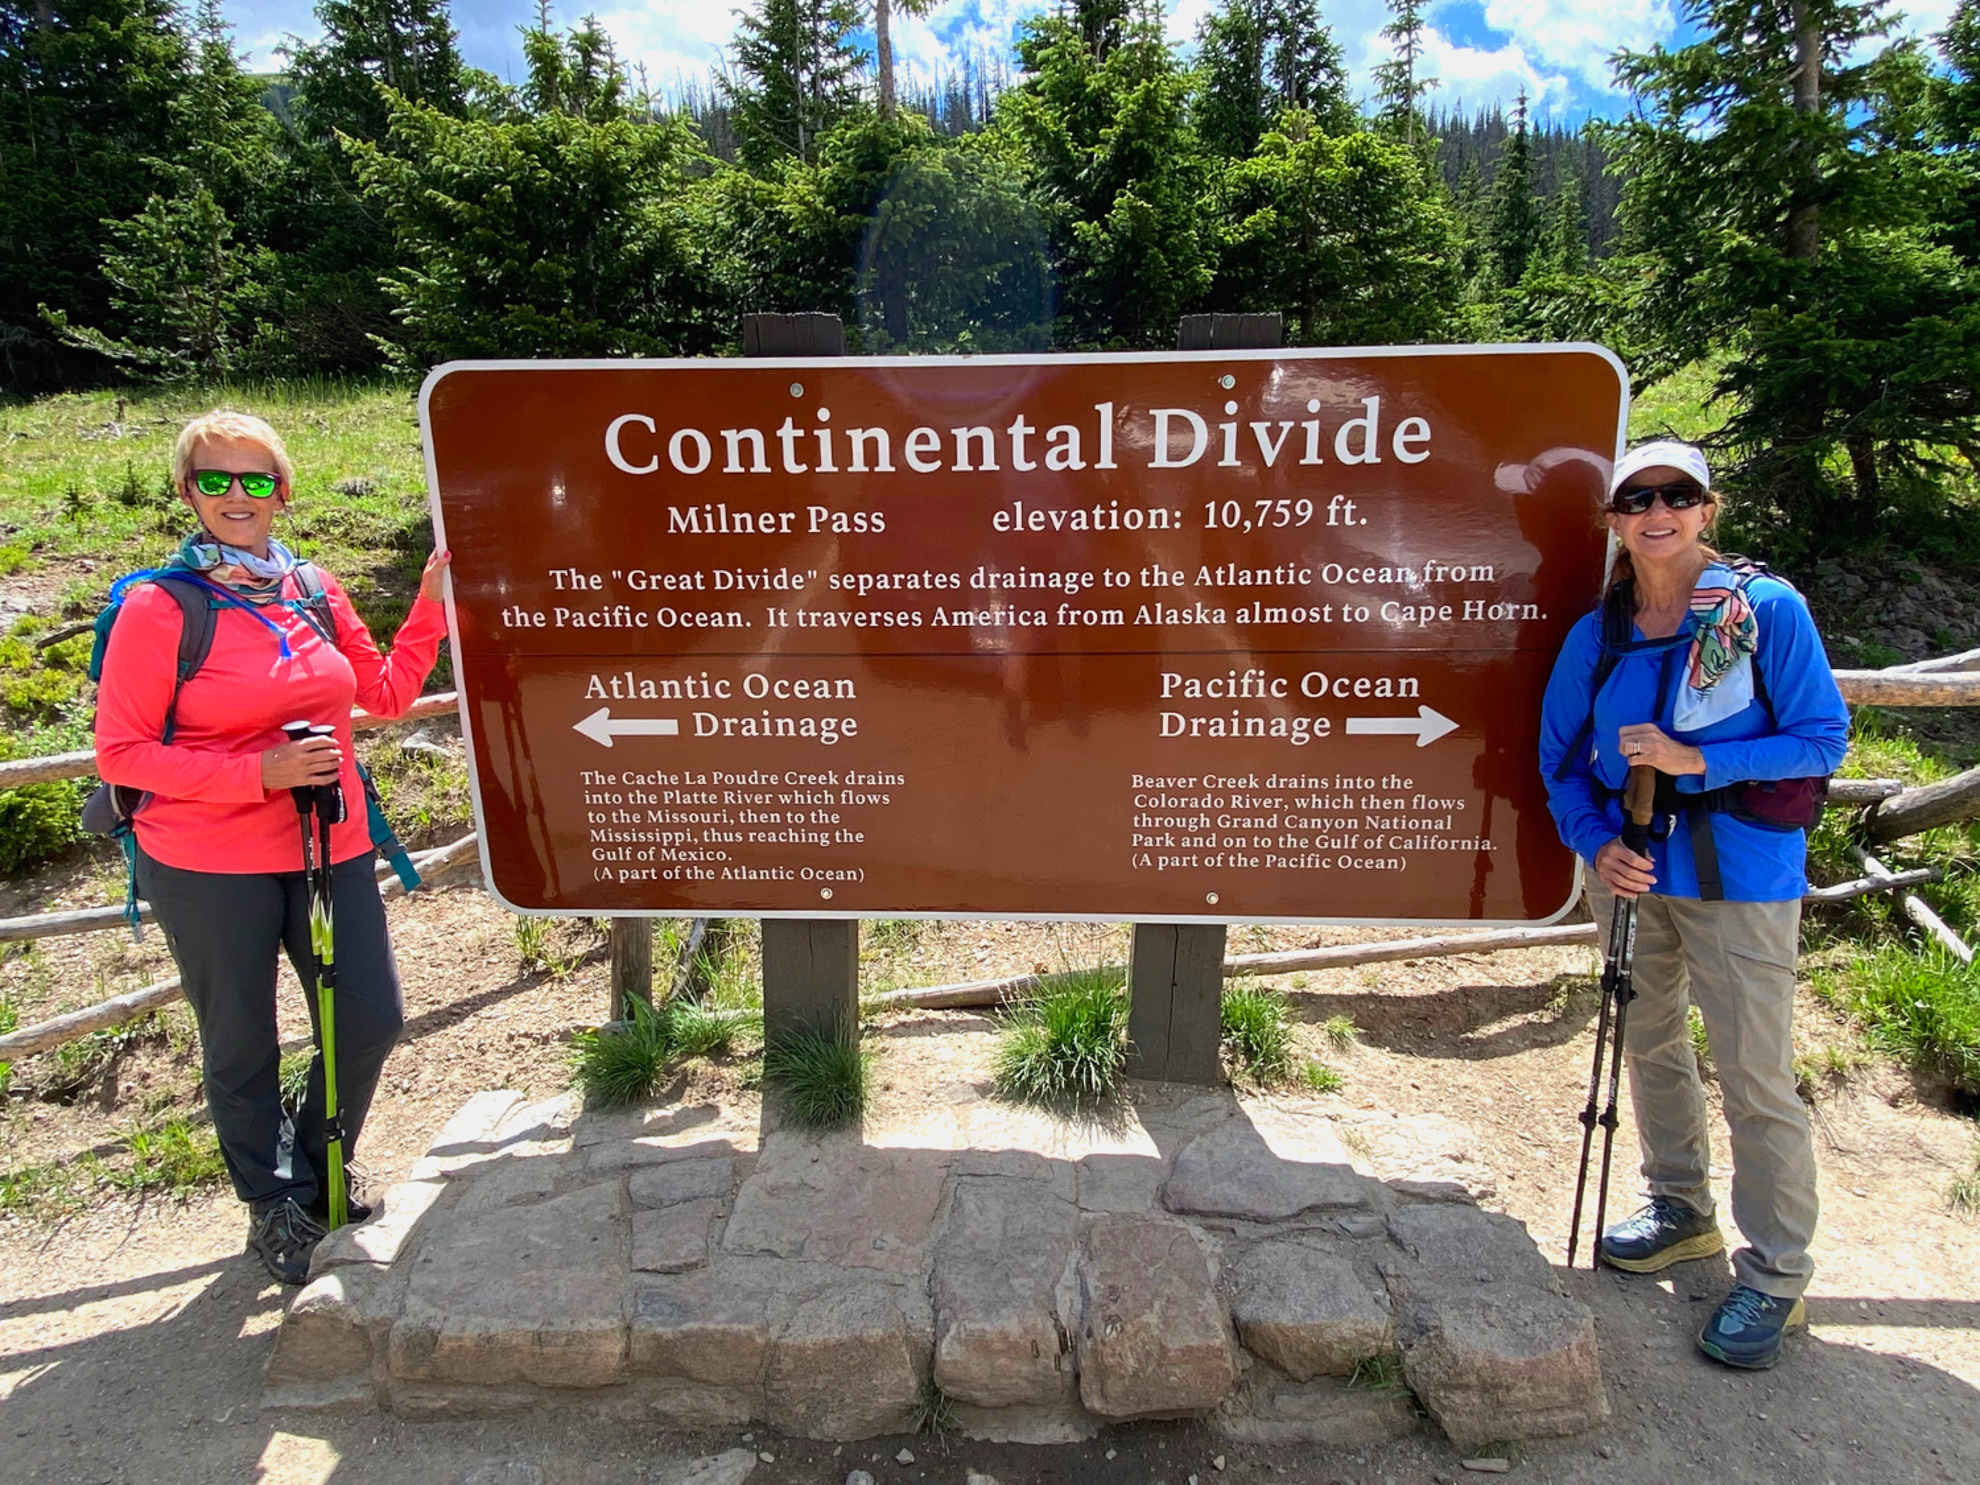 Picture of Peak Pursuits in Colorado's Rocky Mountain National Park